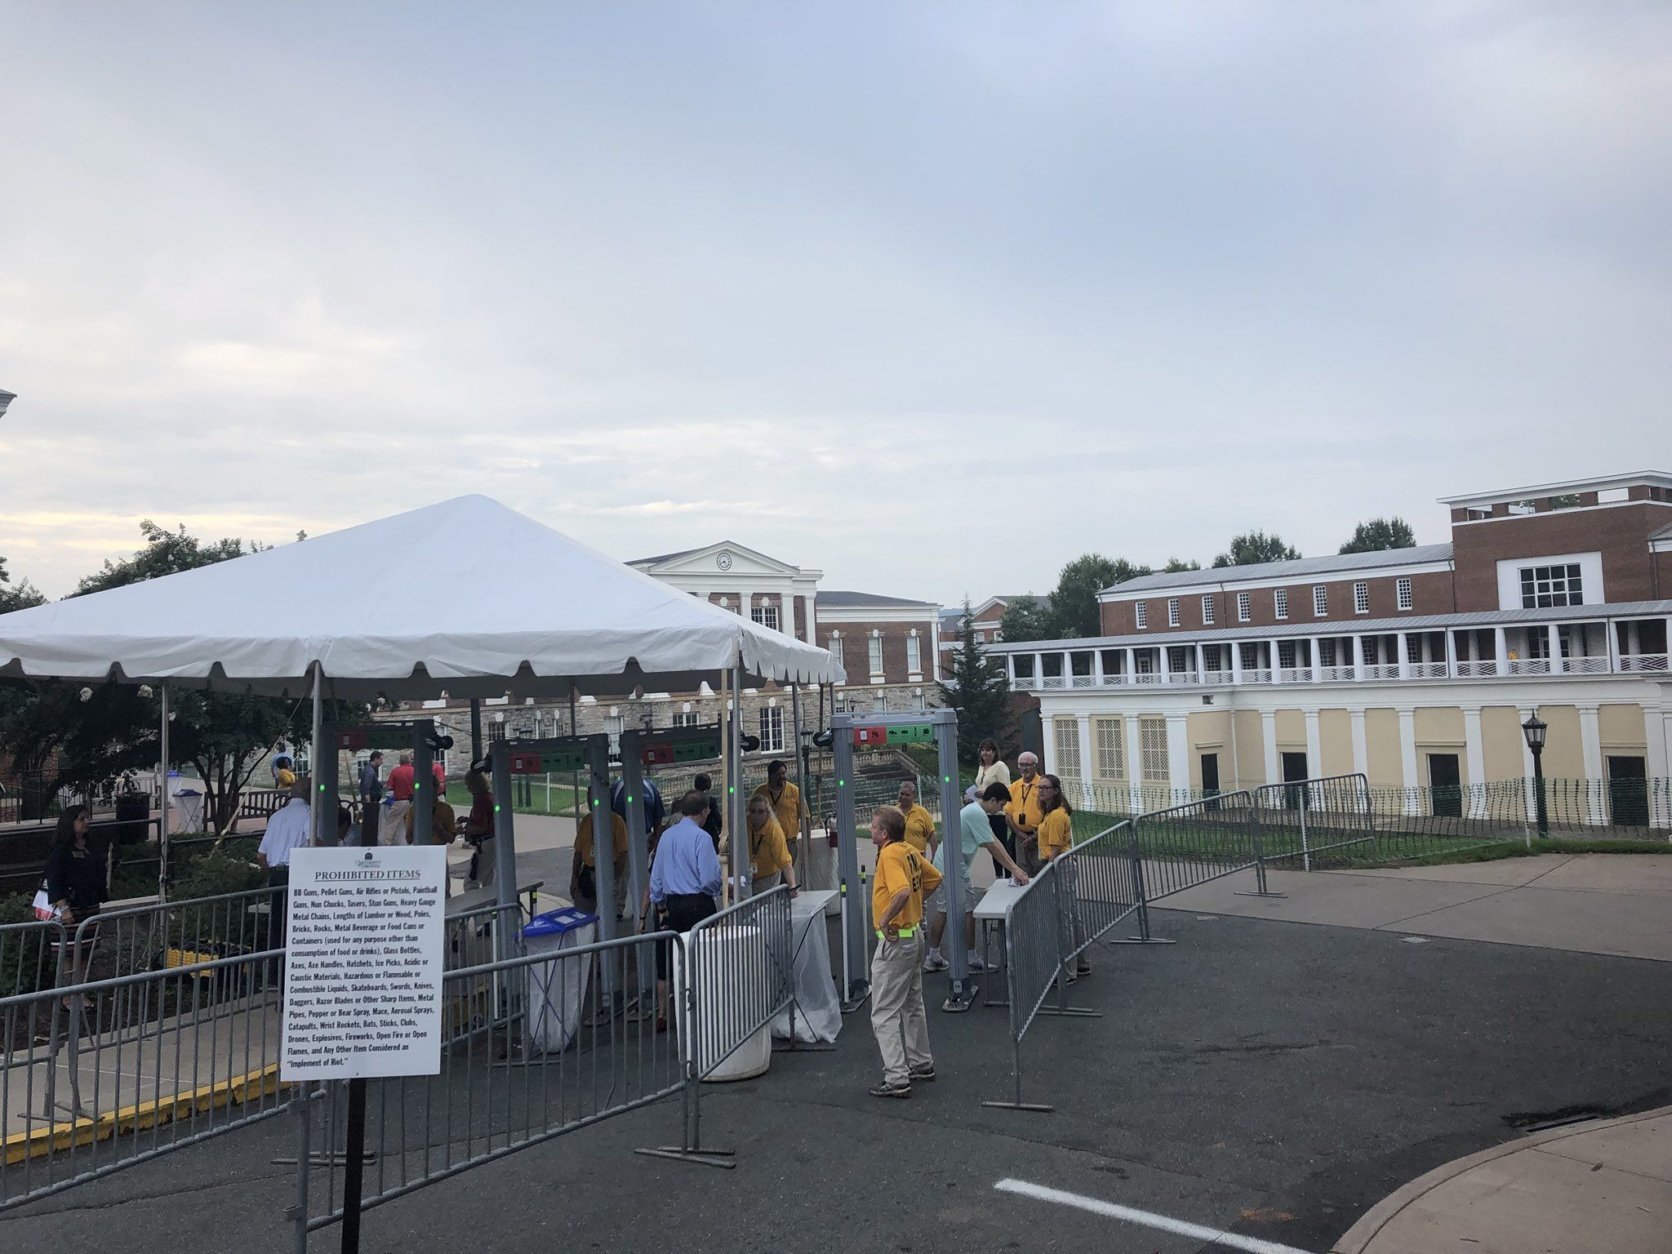 A security checkpoint is seen near the amphitheater for Saturday morning's "The Hope that Summons Us" event at the University of Virginia. It comes one year after white supremacists marched through the Grounds with tiki torches, and a day before anniversary of Heather Heyer’s death. (WTOP/Max Smith)